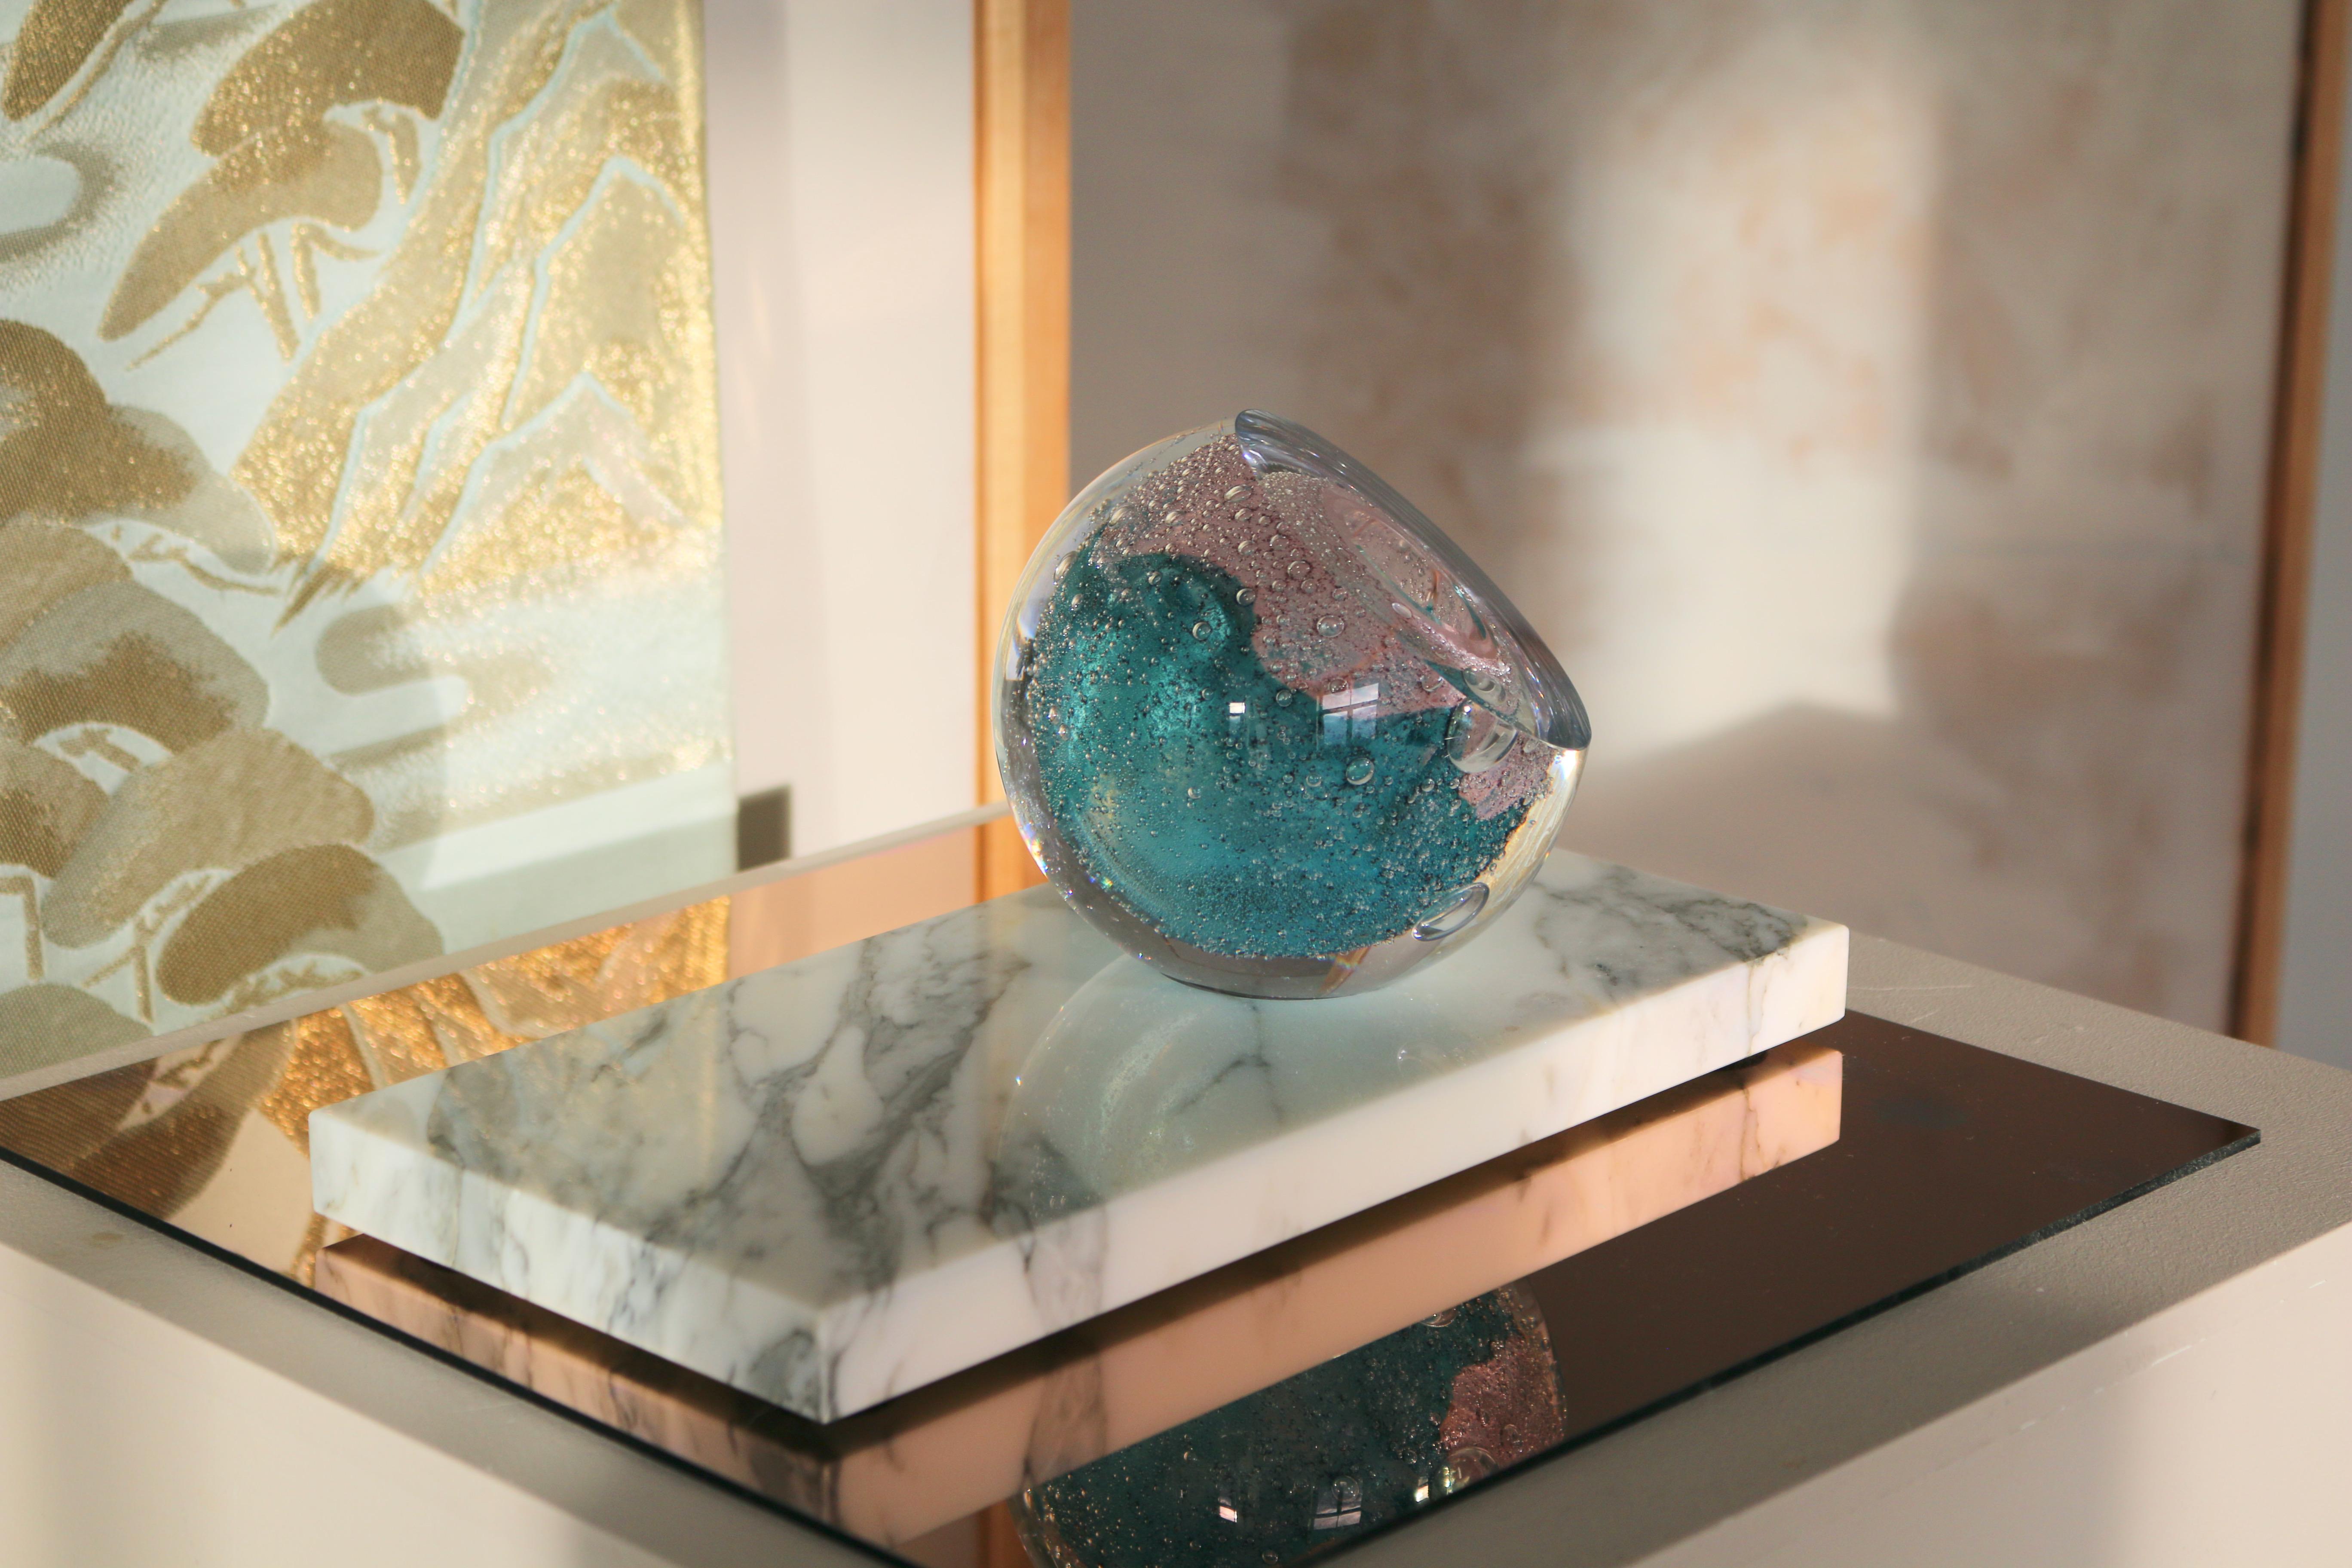 Hand-Crafted 'Sea Foam' Vase in Pink & Blue on Marble For Sale